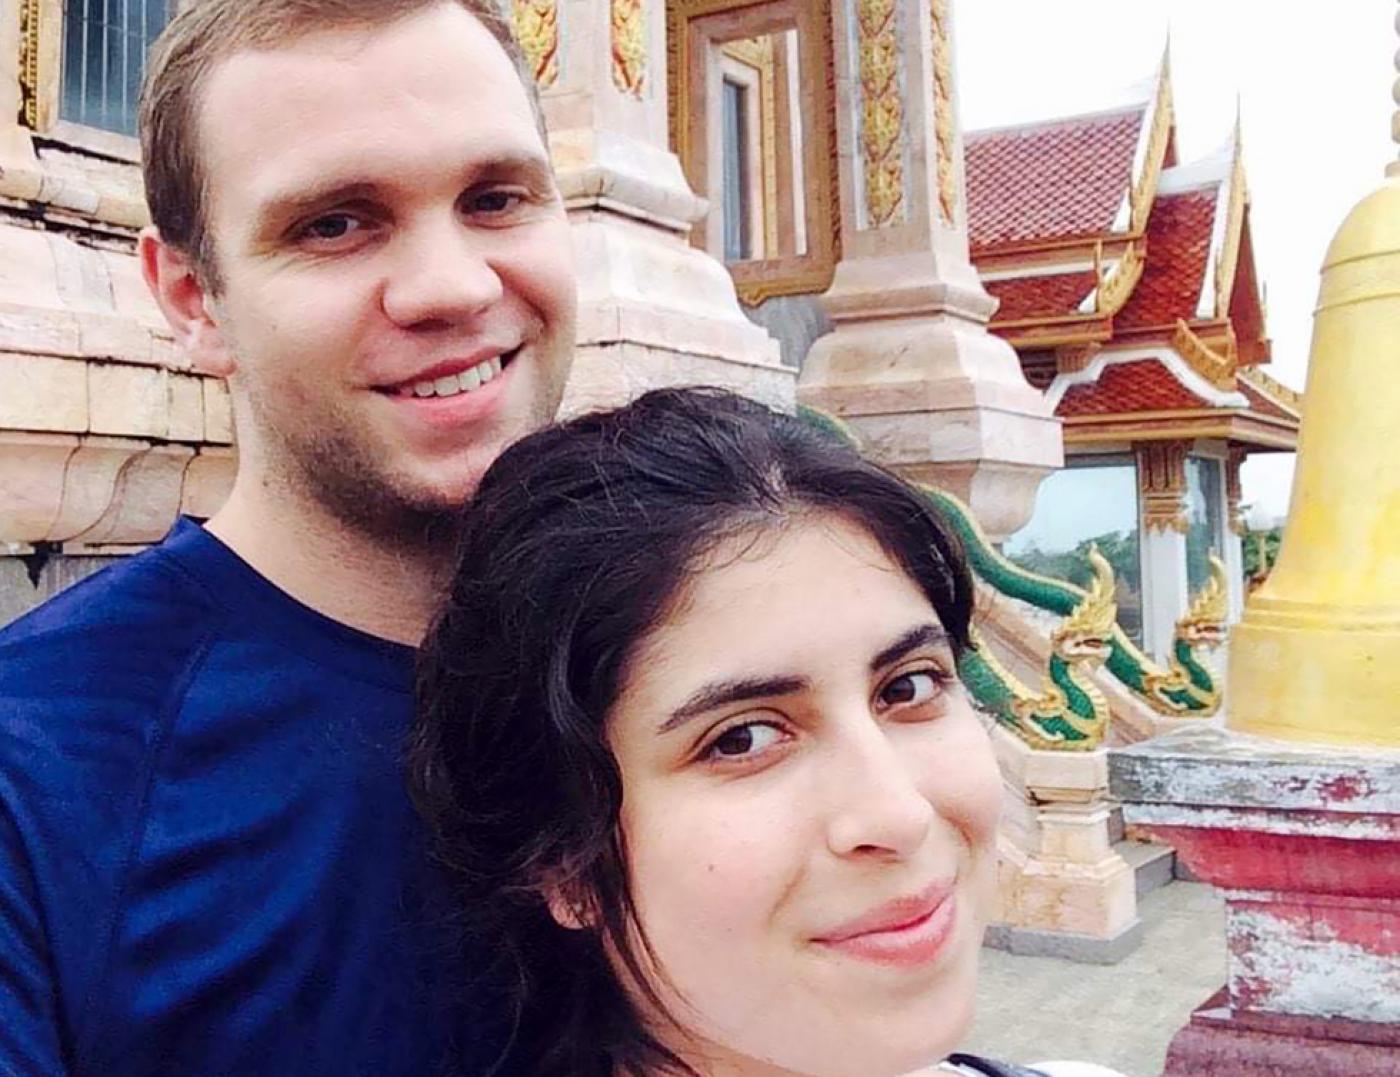 British student Matthew Hedges (L) and his wife Daniela Tejada posing while on holiday in Thailand (AFP)